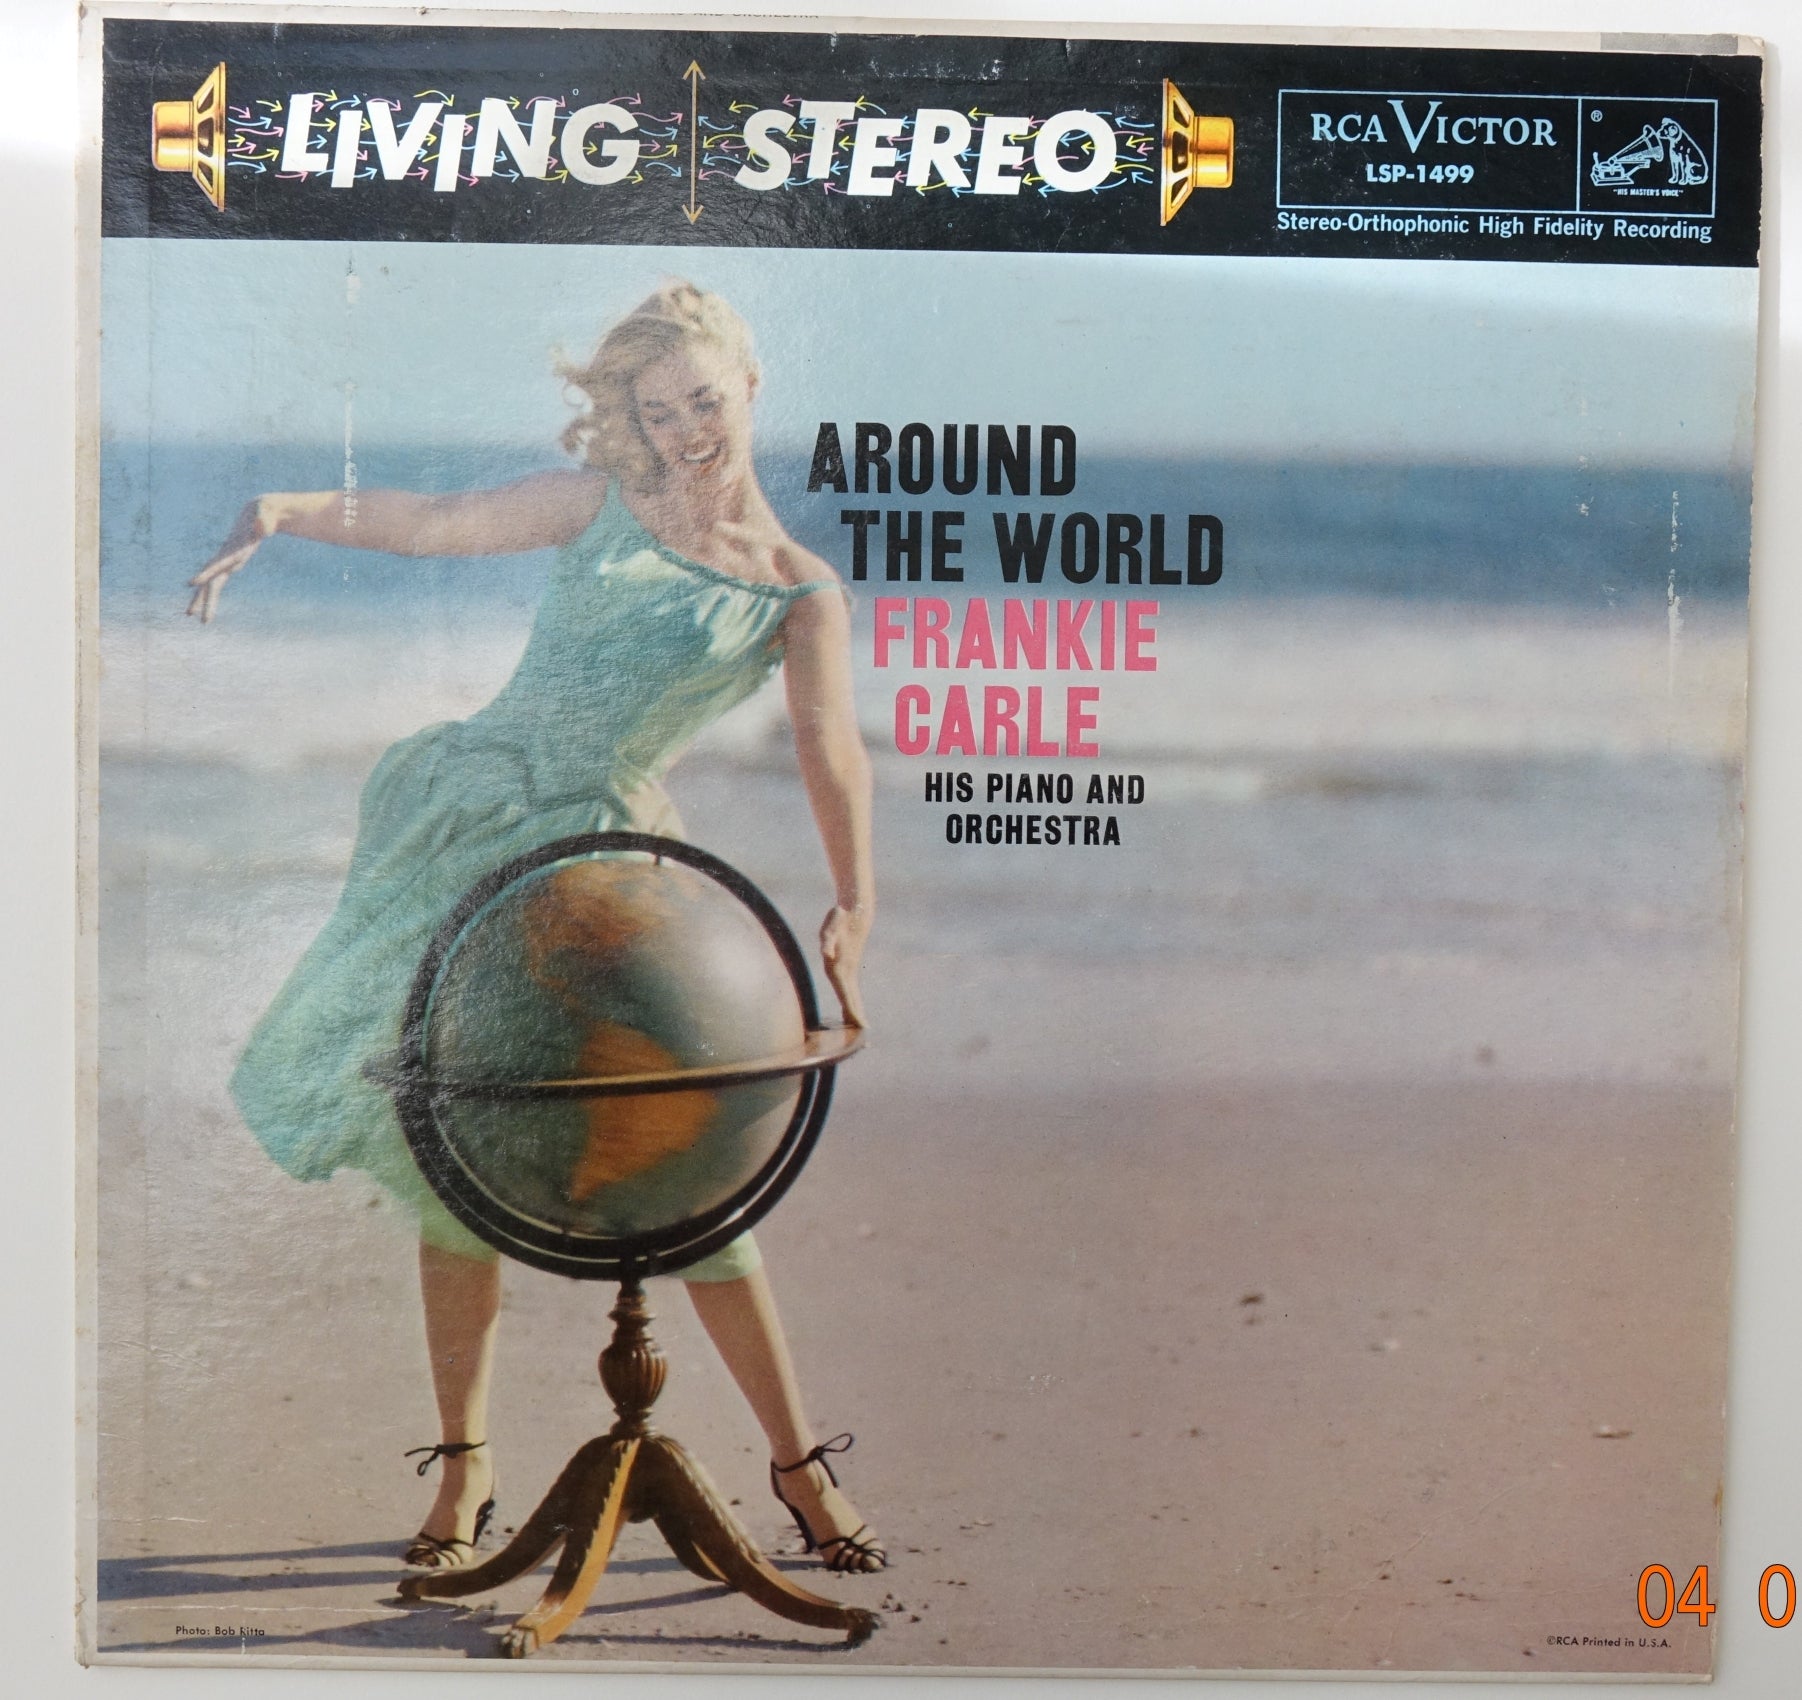 RCA009: Around The World - Frankie Carle - His Piano and Orchestra